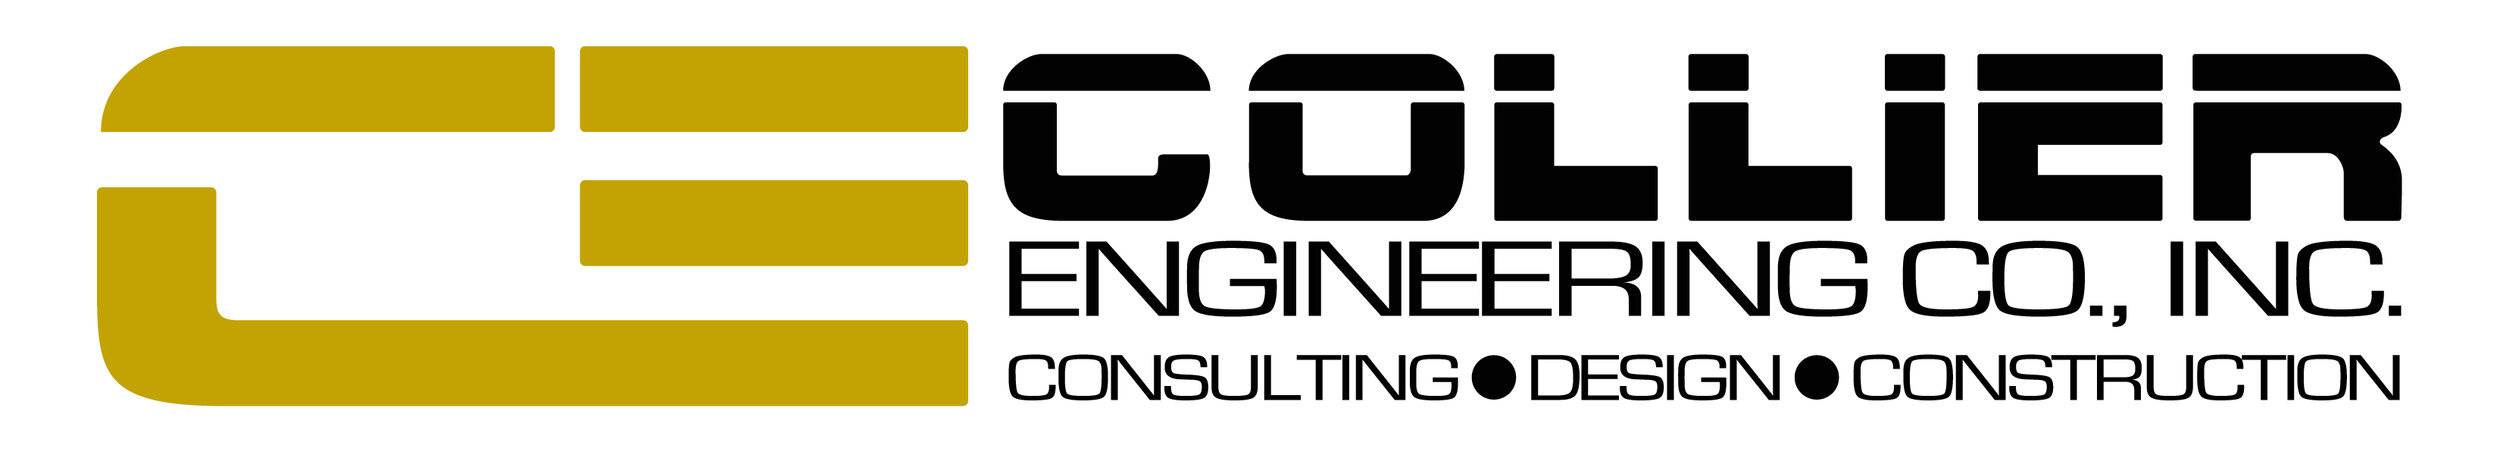 Collier Engineering Co., Inc.